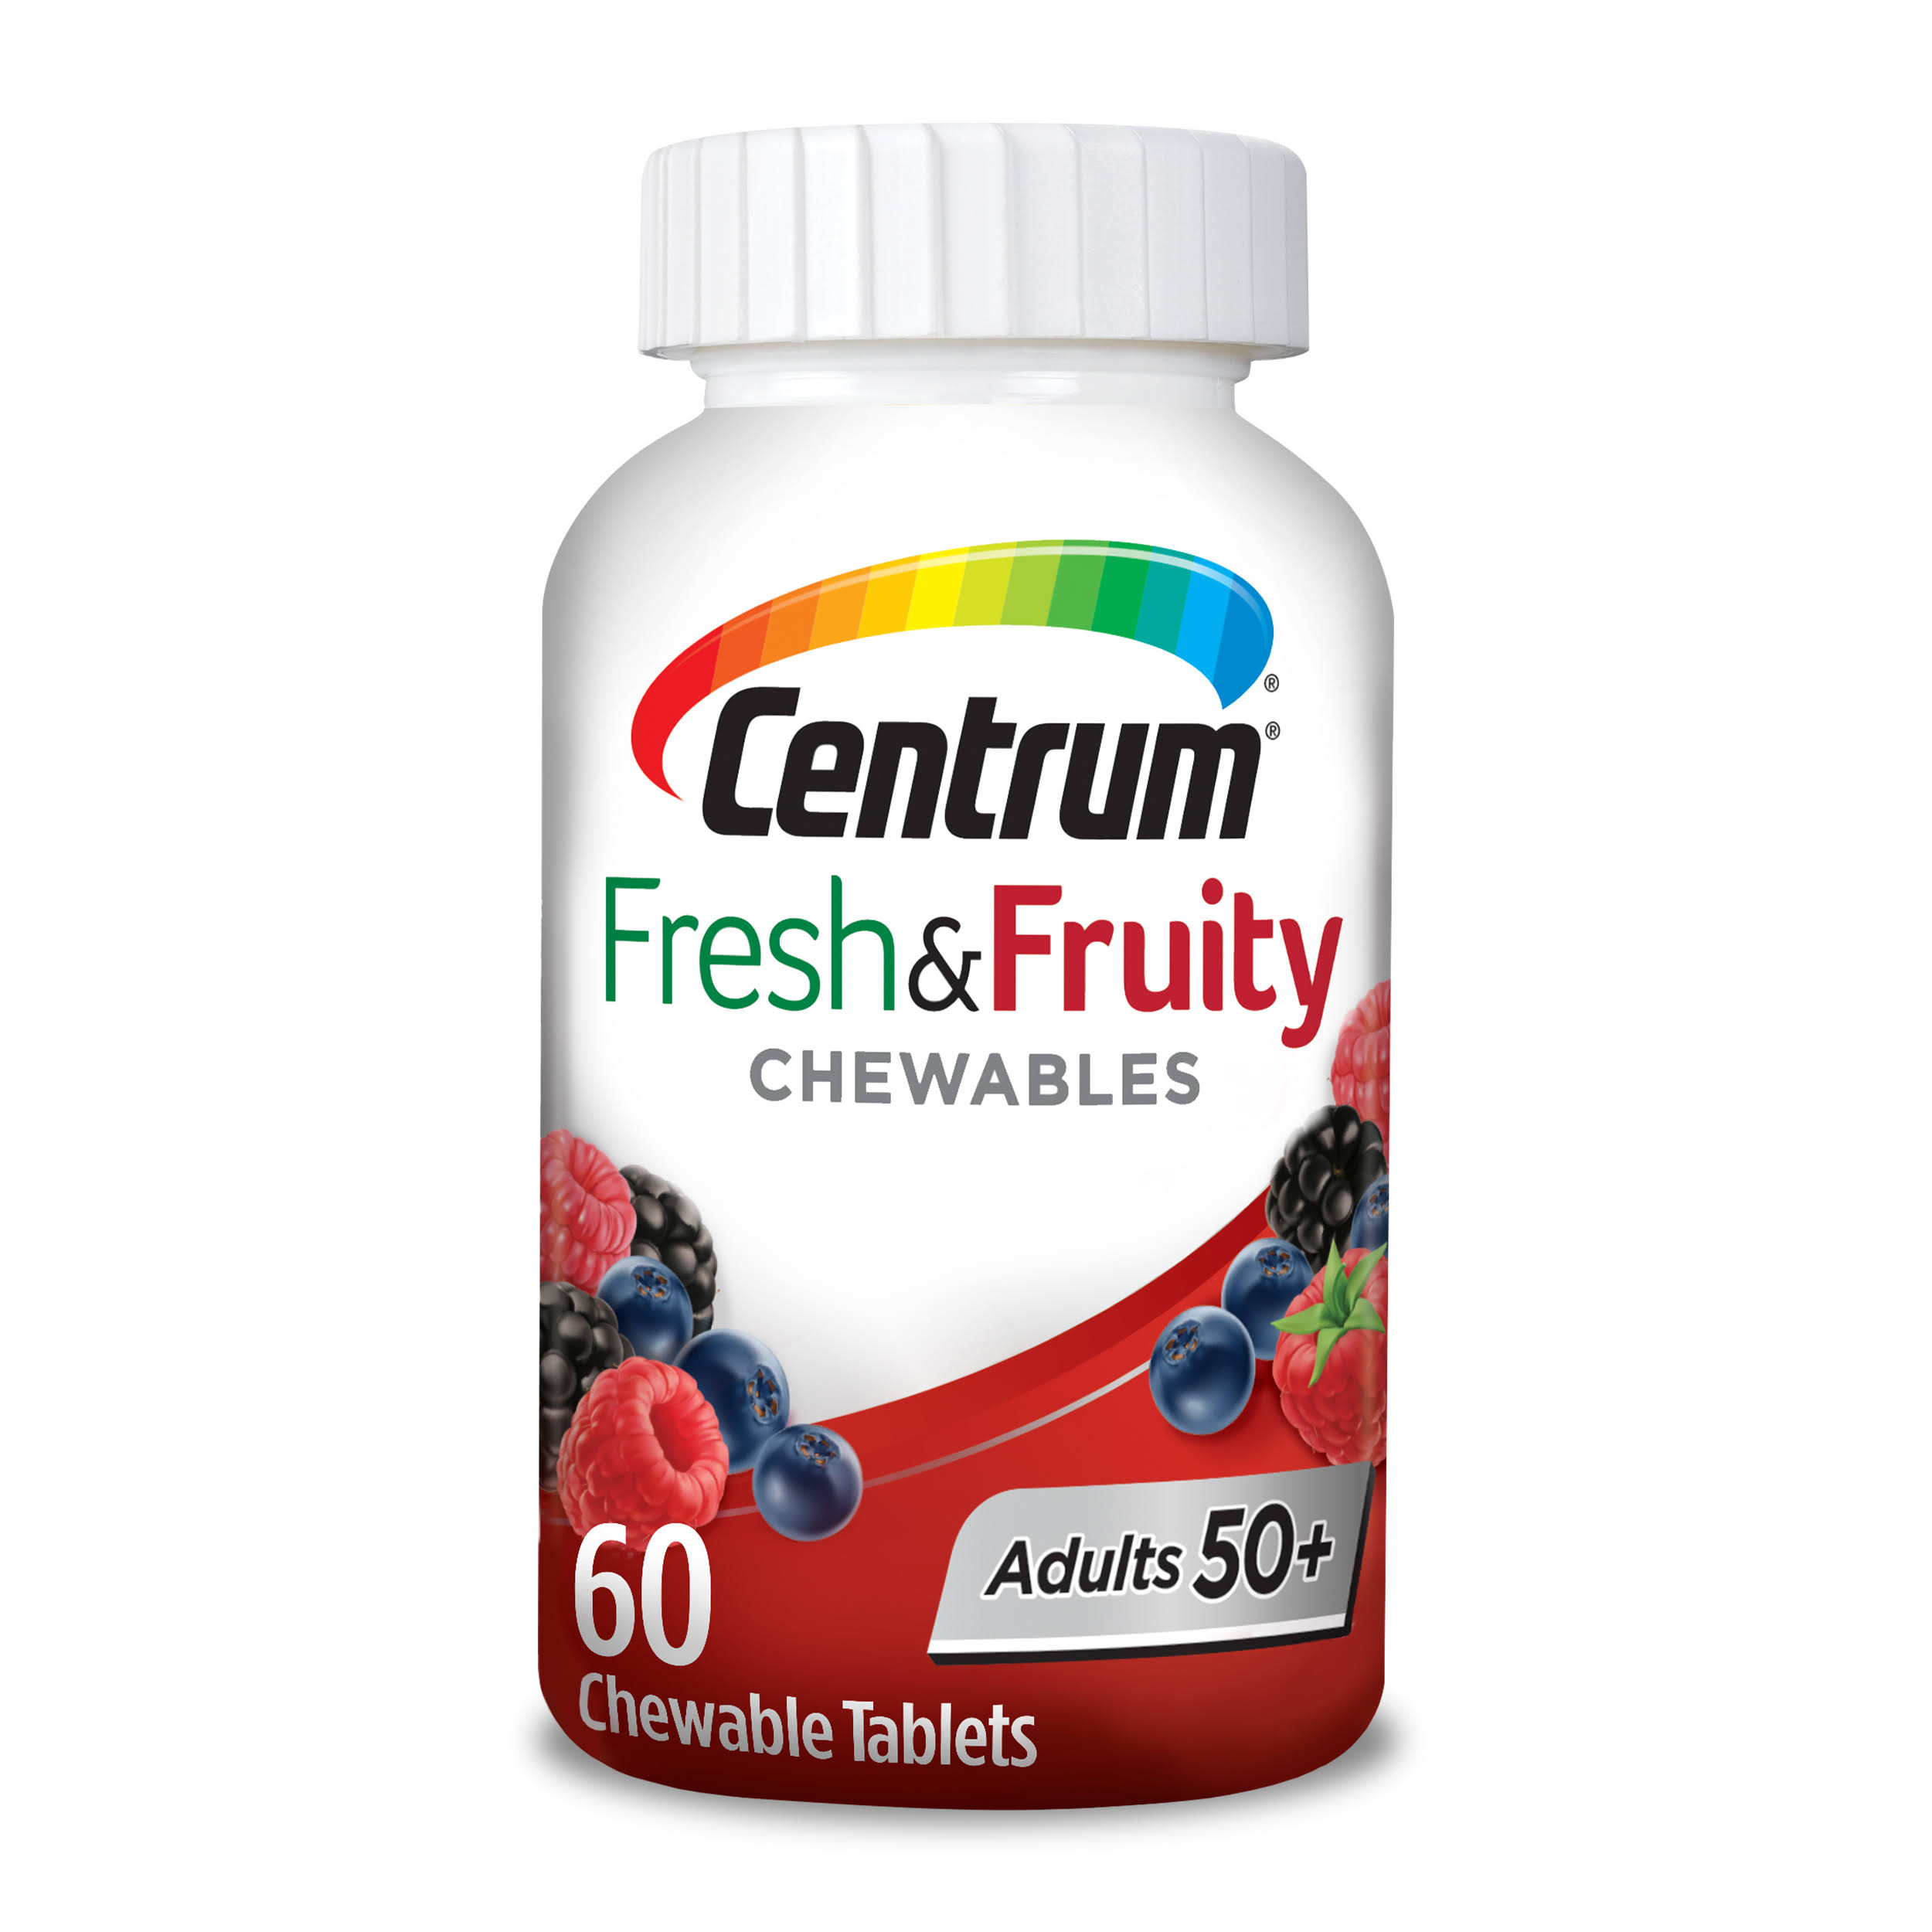 Centrum Chewables Multivitamin/Multimineral, Fresh& Fruity, Adults 50+, Tablets, Mixed Berry - 60 tablets